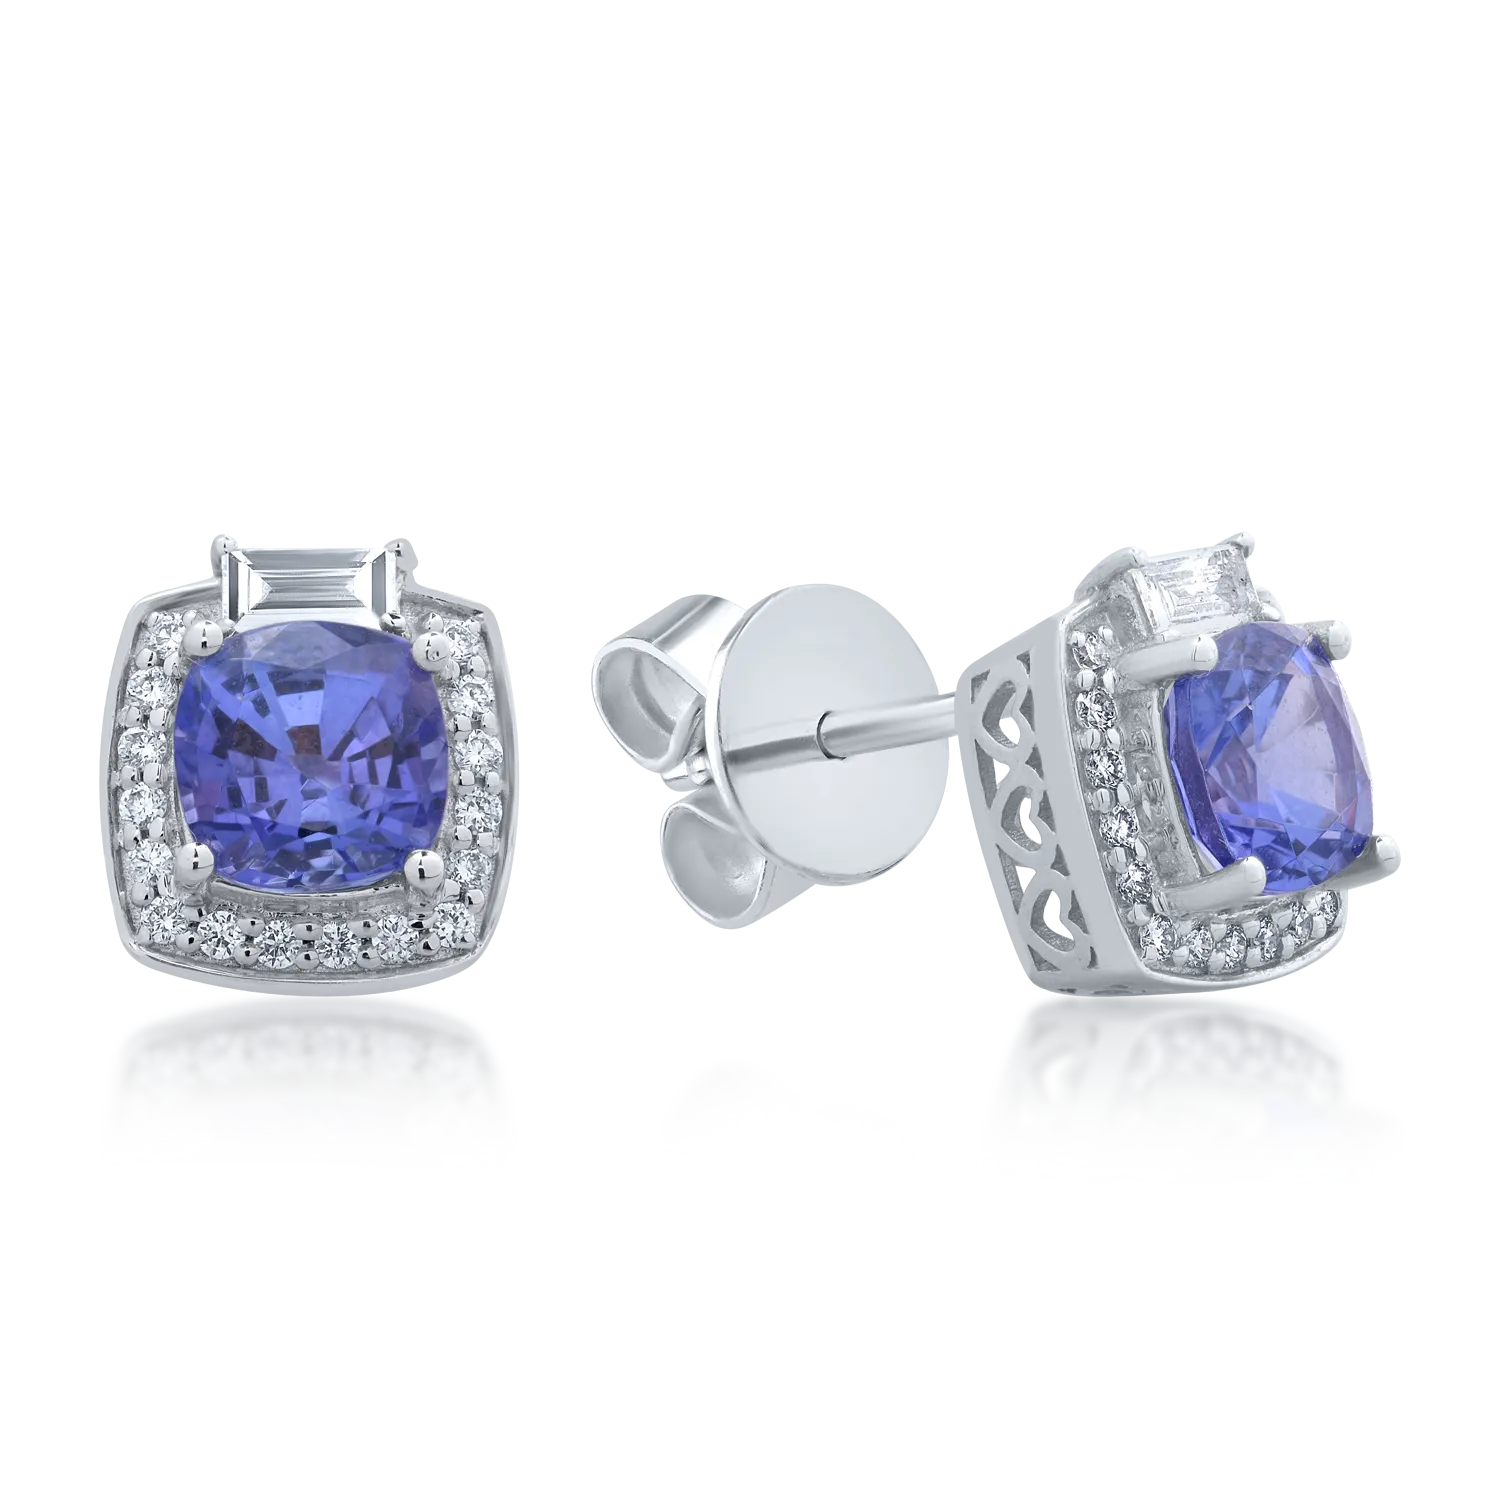 18K white gold earrings with 2.2ct tanzanites and 0.367ct diamonds